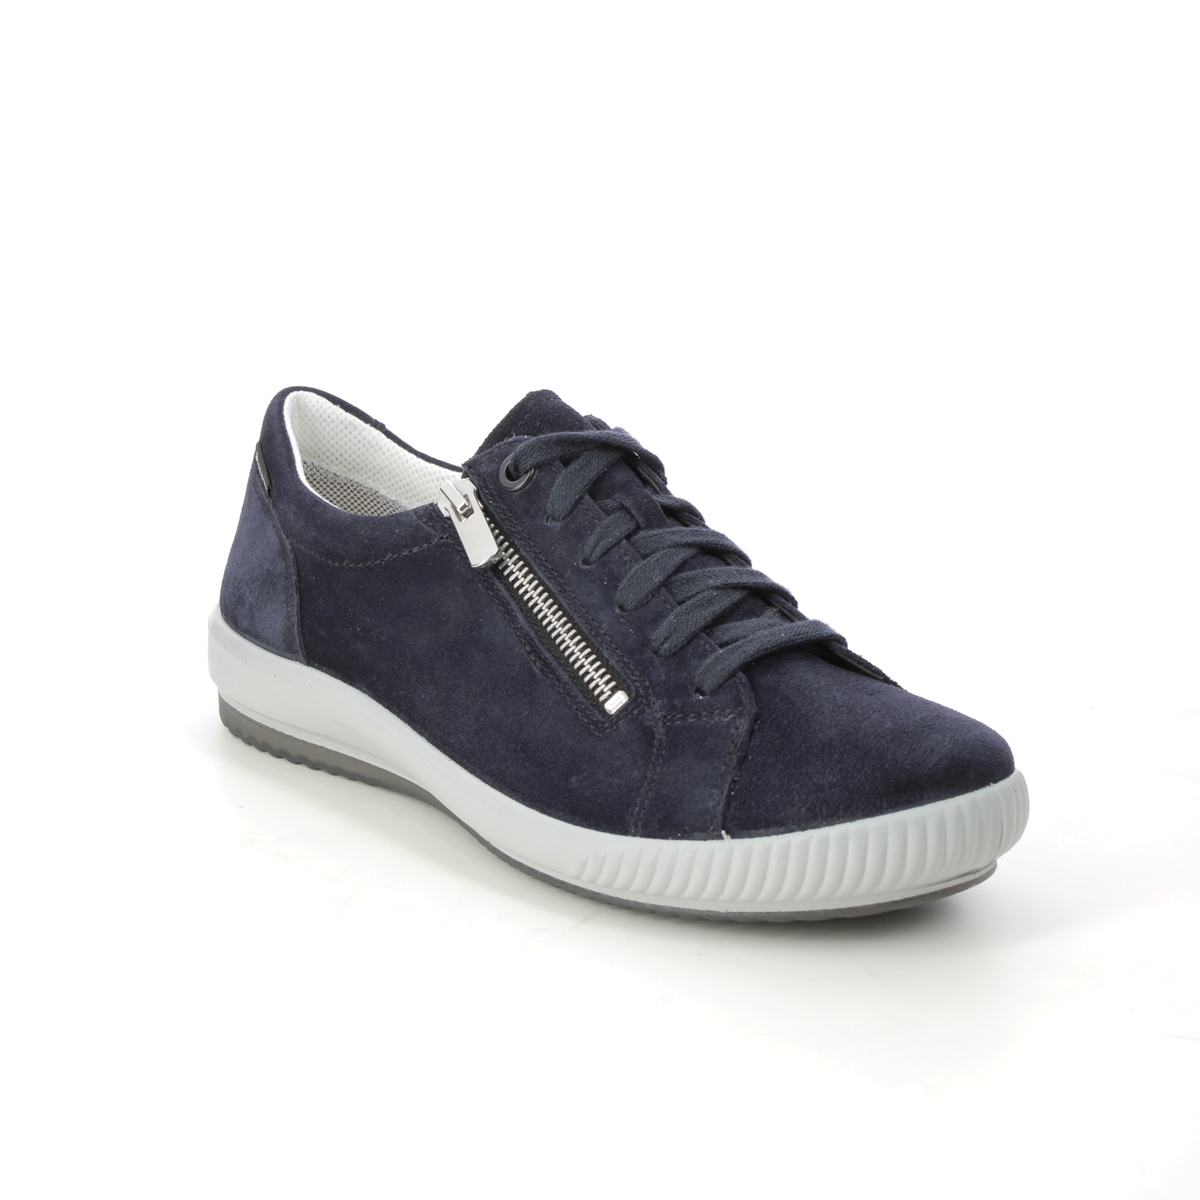 Legero Tanaro 5 Gtx Navy Suede Womens Lacing Shoes 2000219-8000 In Size 5 In Plain Navy Suede